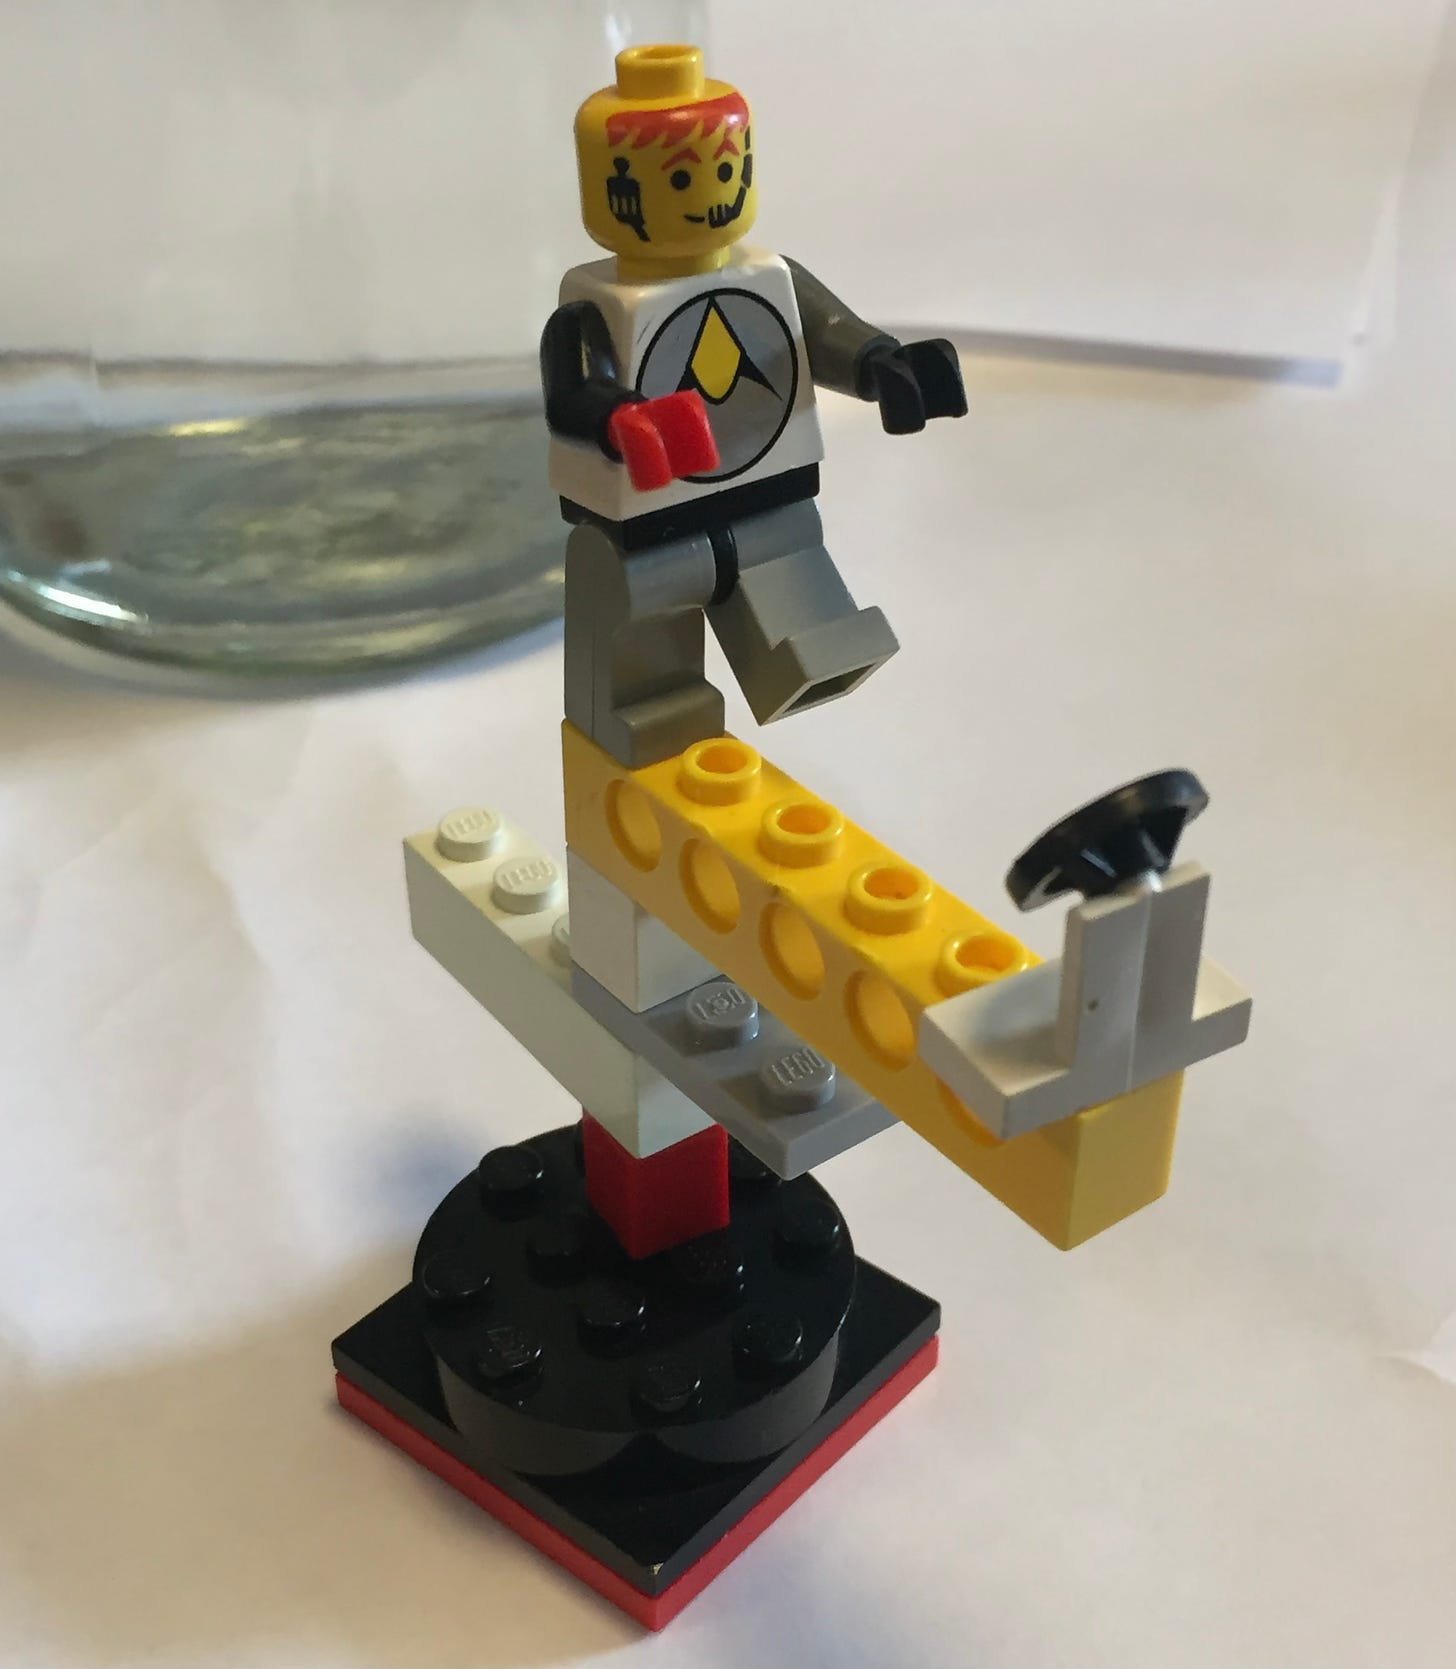 Lego person heading towards a steering wheel as if walking the plank: a playful depiction of leadership?